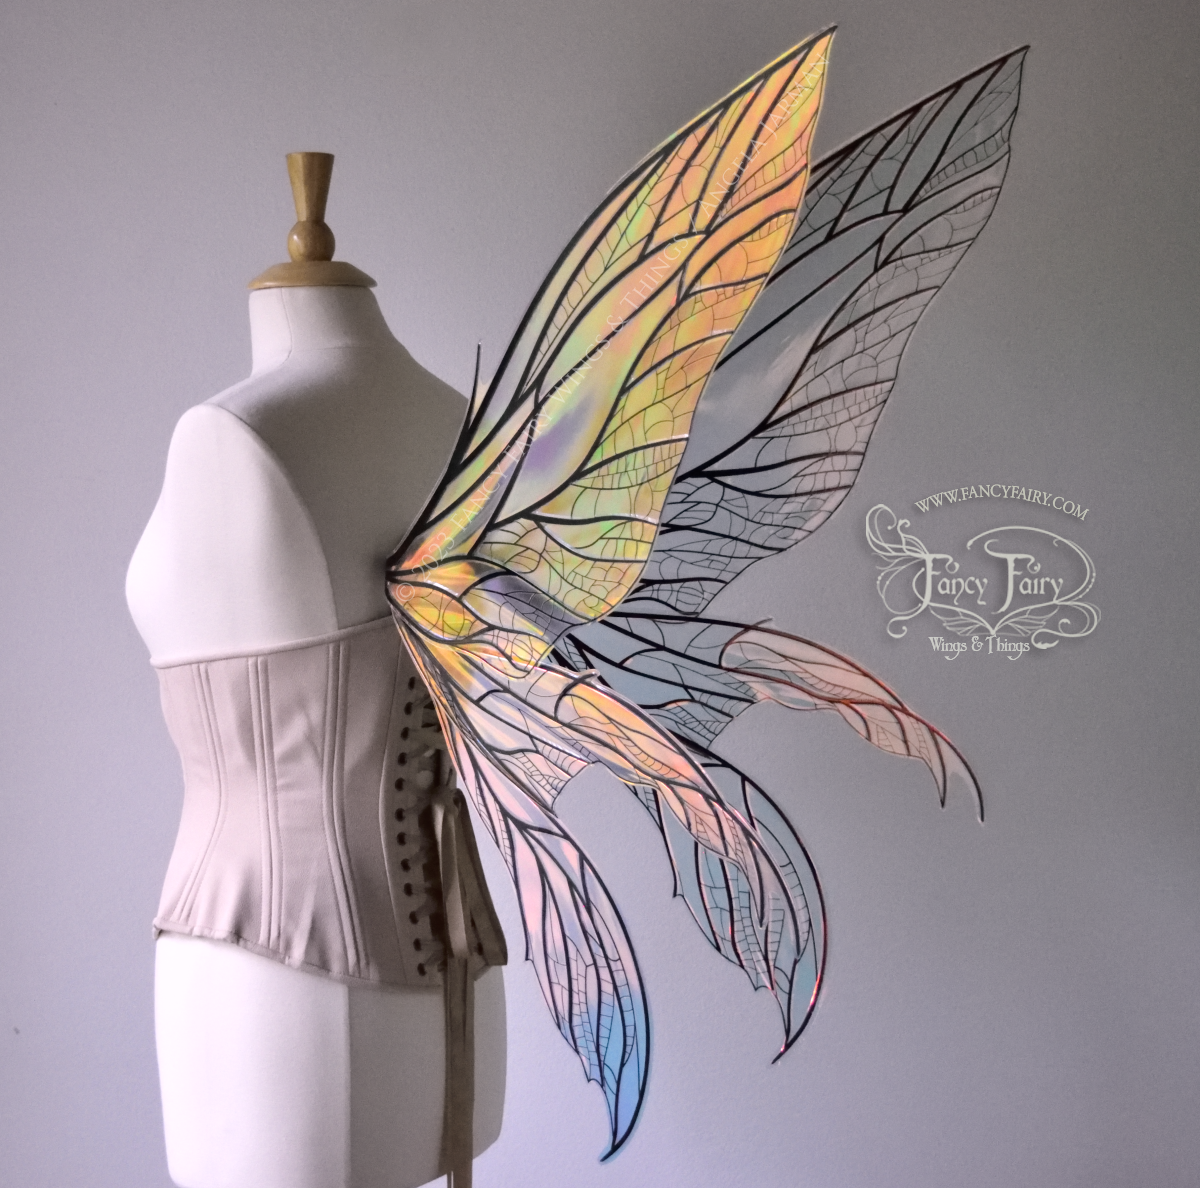 Fayette Convertible Iridescent "Pix" Fairy Wings in Clear Blush with Black veins